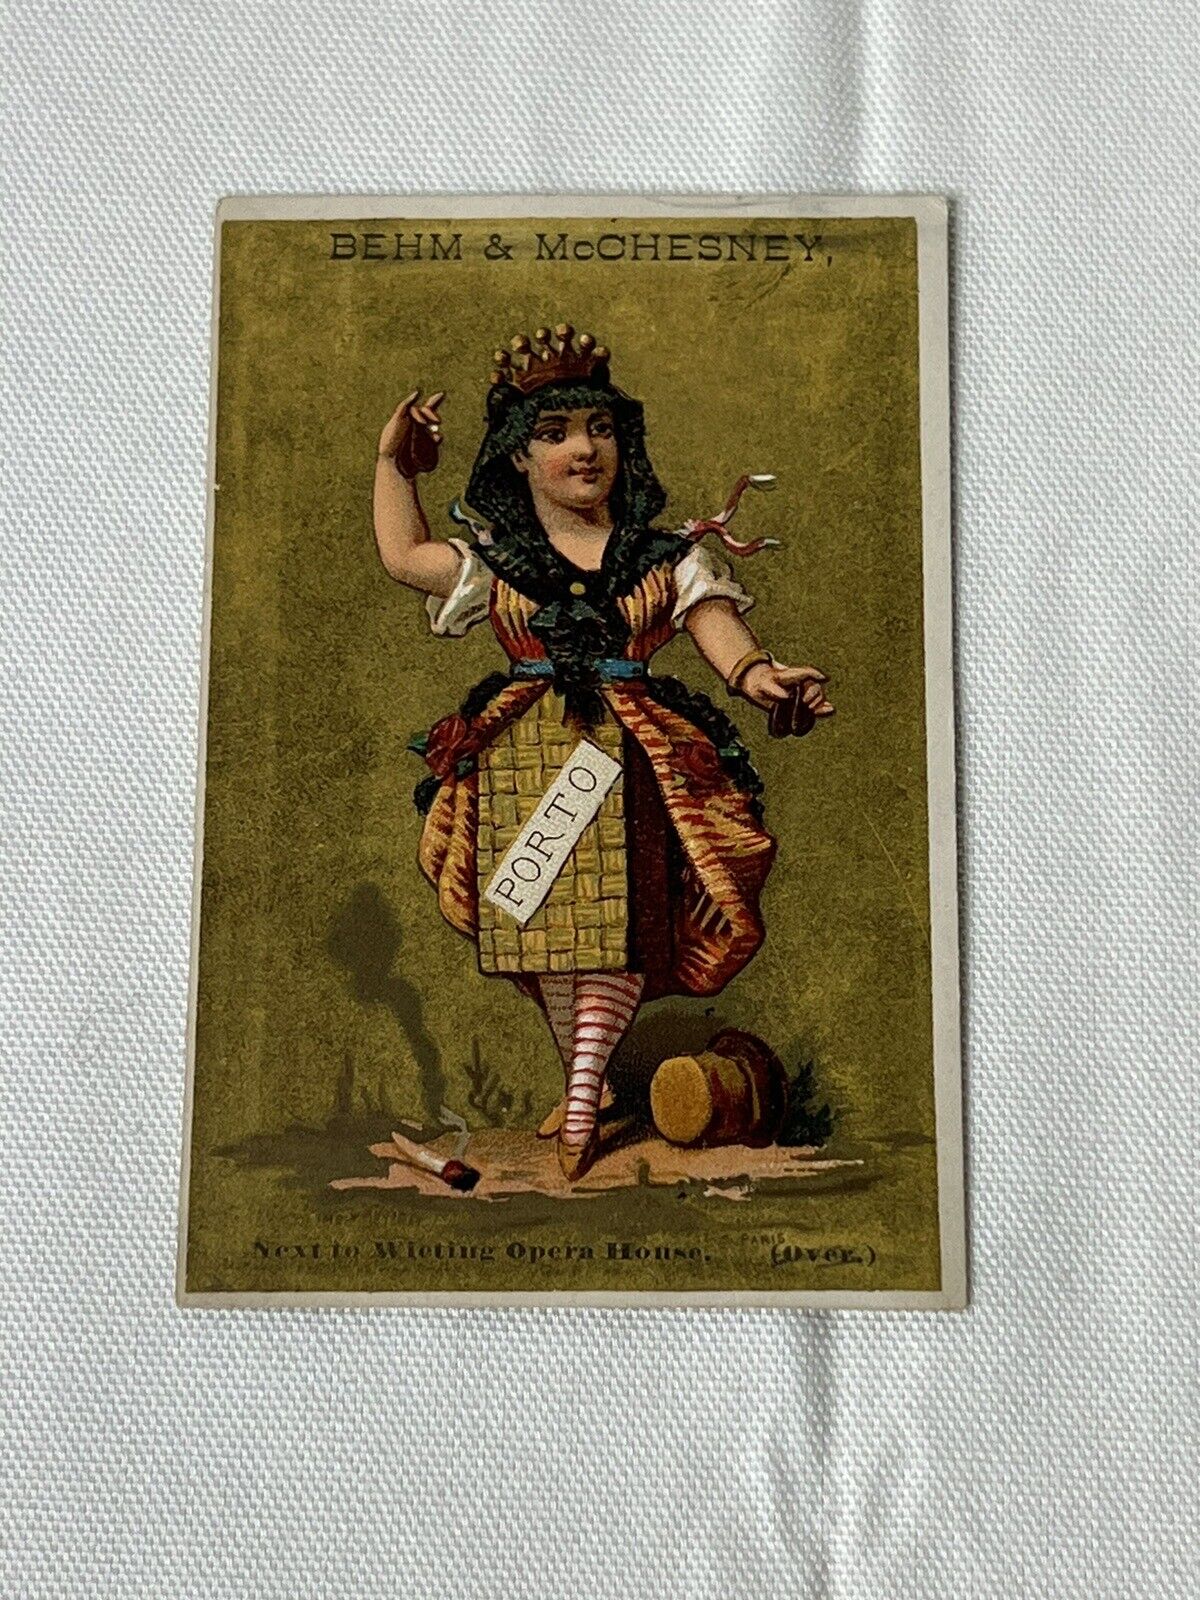 Porto Wine Spanish Girl Castanets Gold Syracuse Advertising Vict Card c1880s